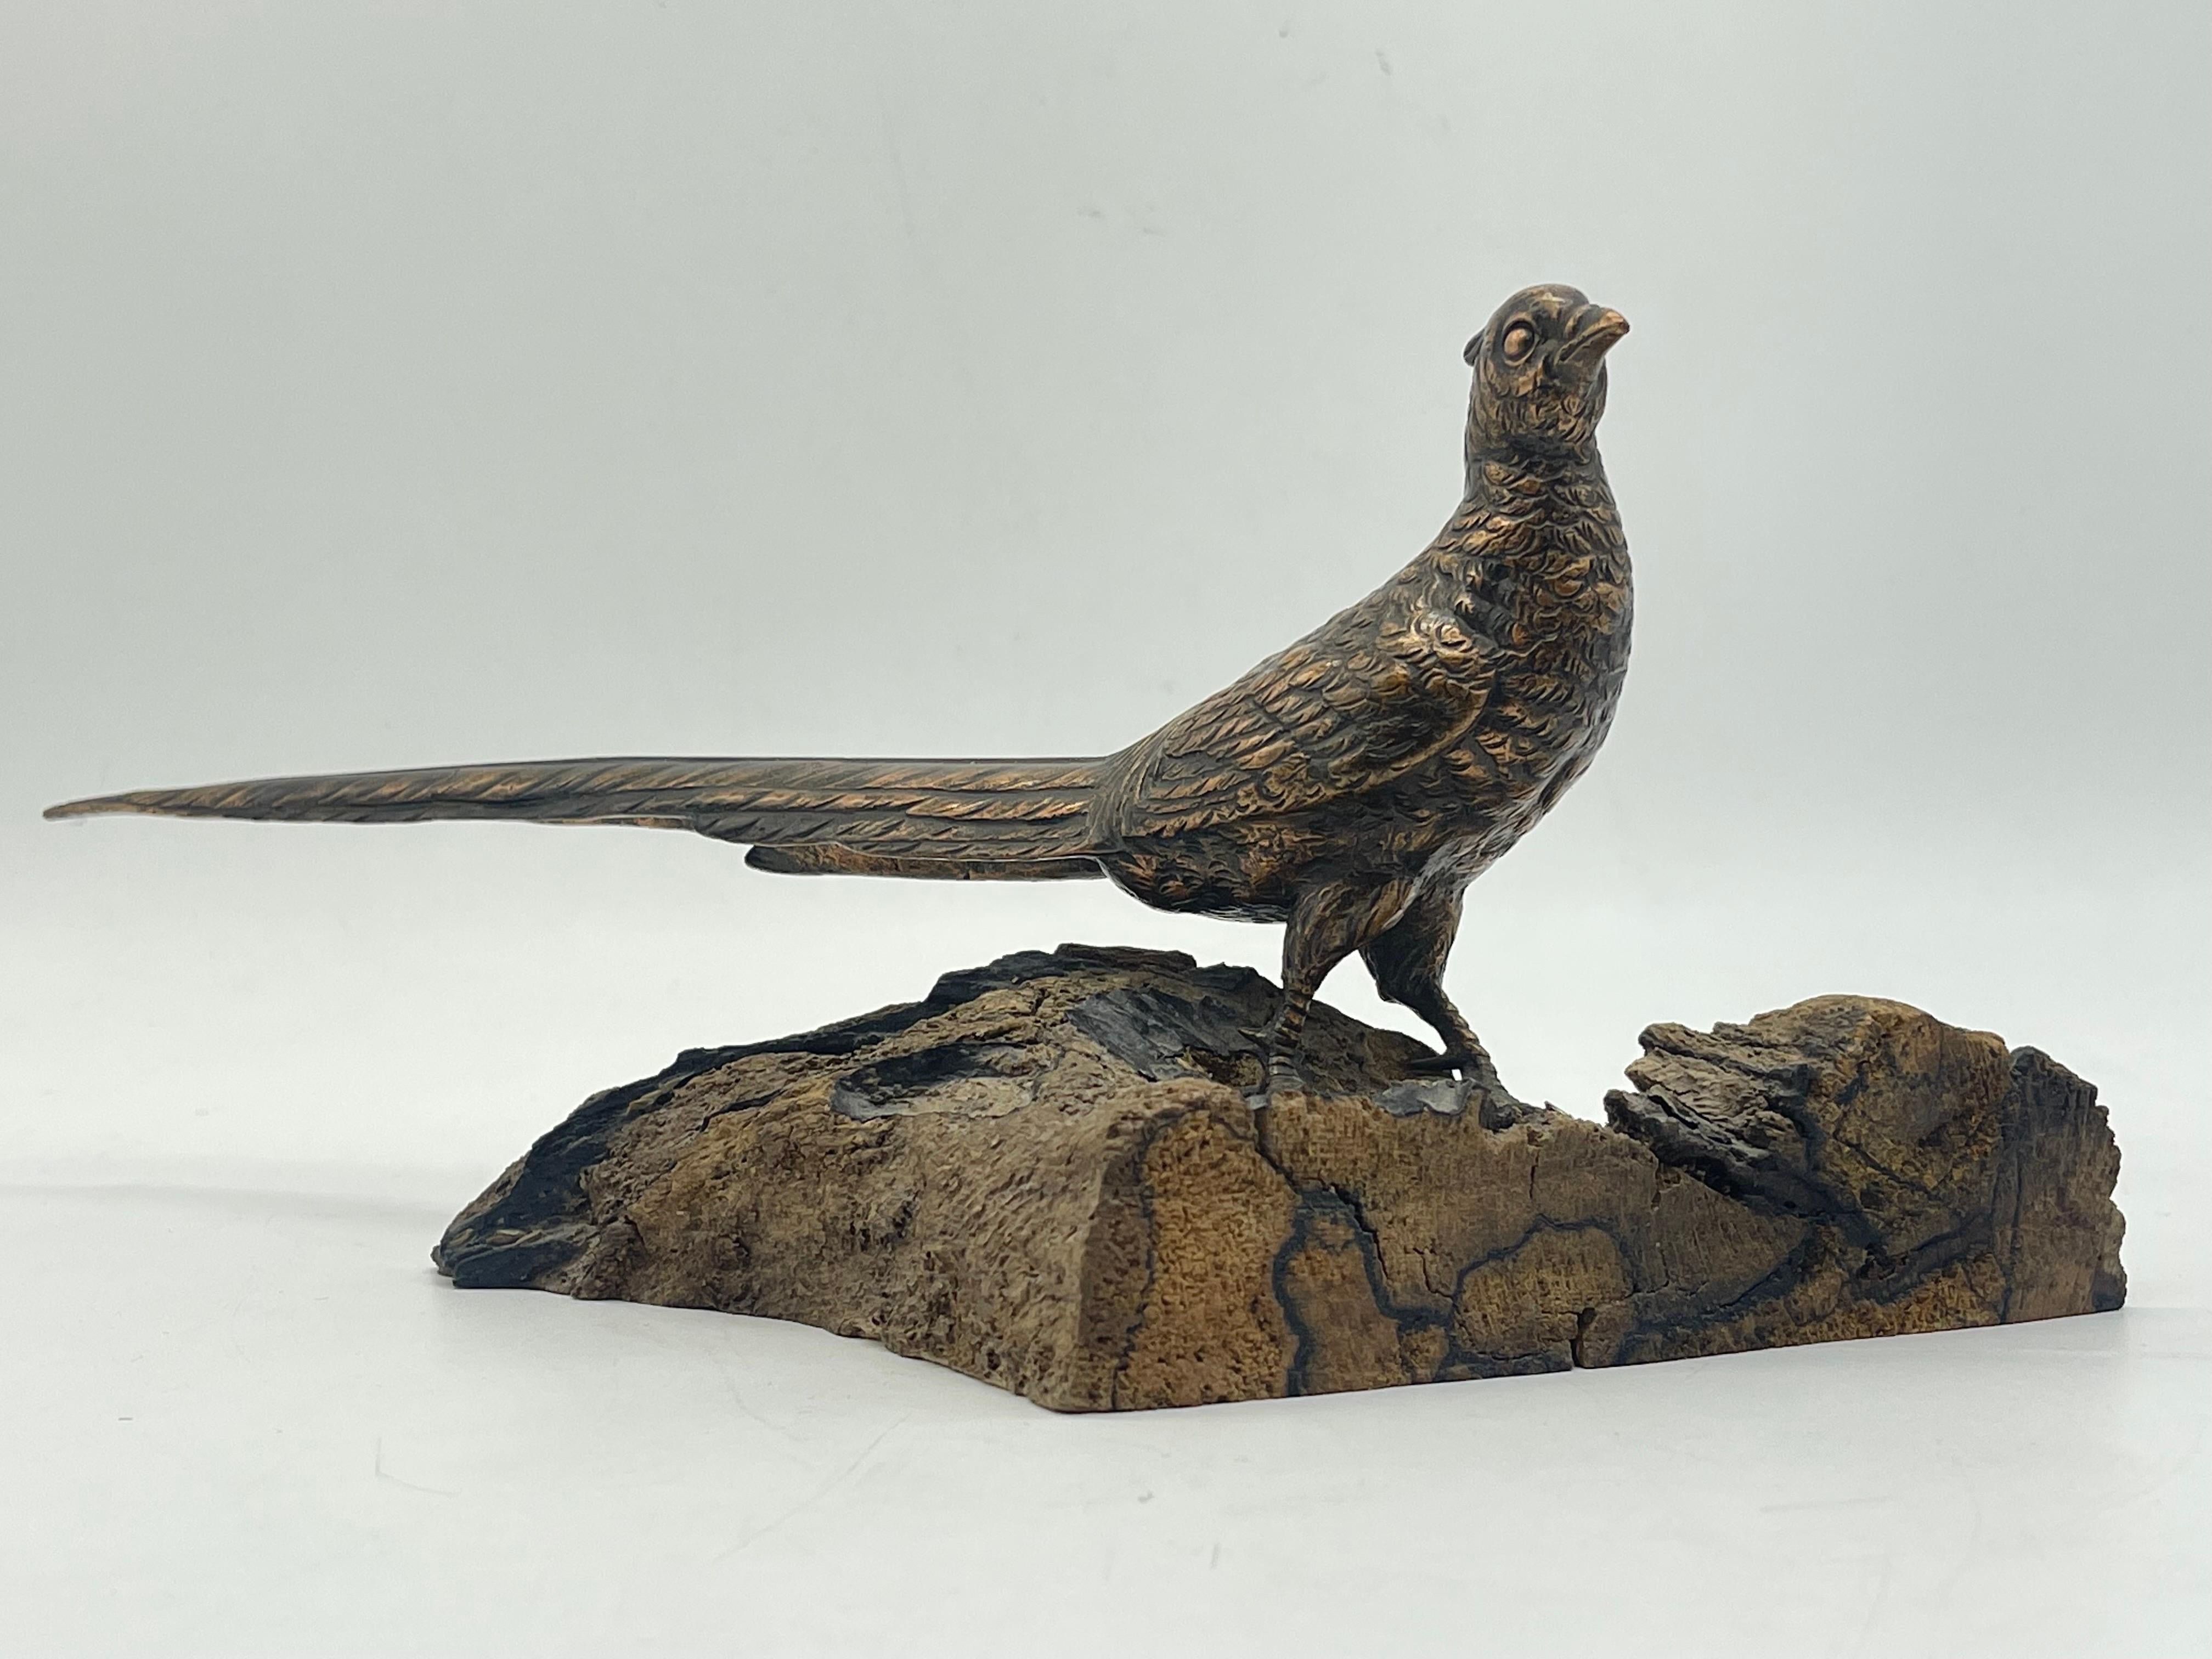 Antique Bird Bronze Sculpture / Figure 

Sitting on wood pine fir wood

The condition can be seen in the pictures.